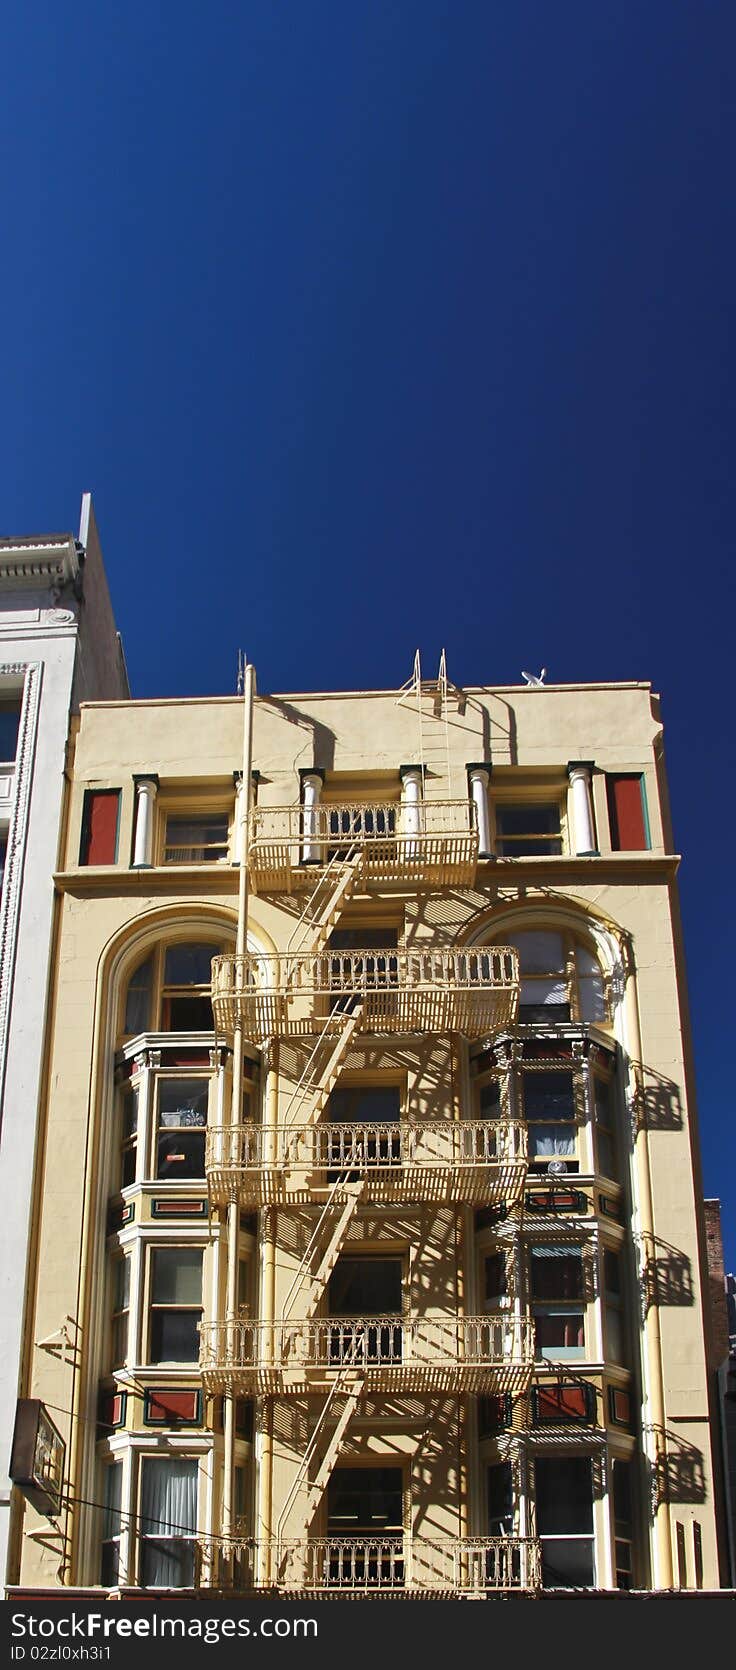 Building with external rescue fire escape staircase